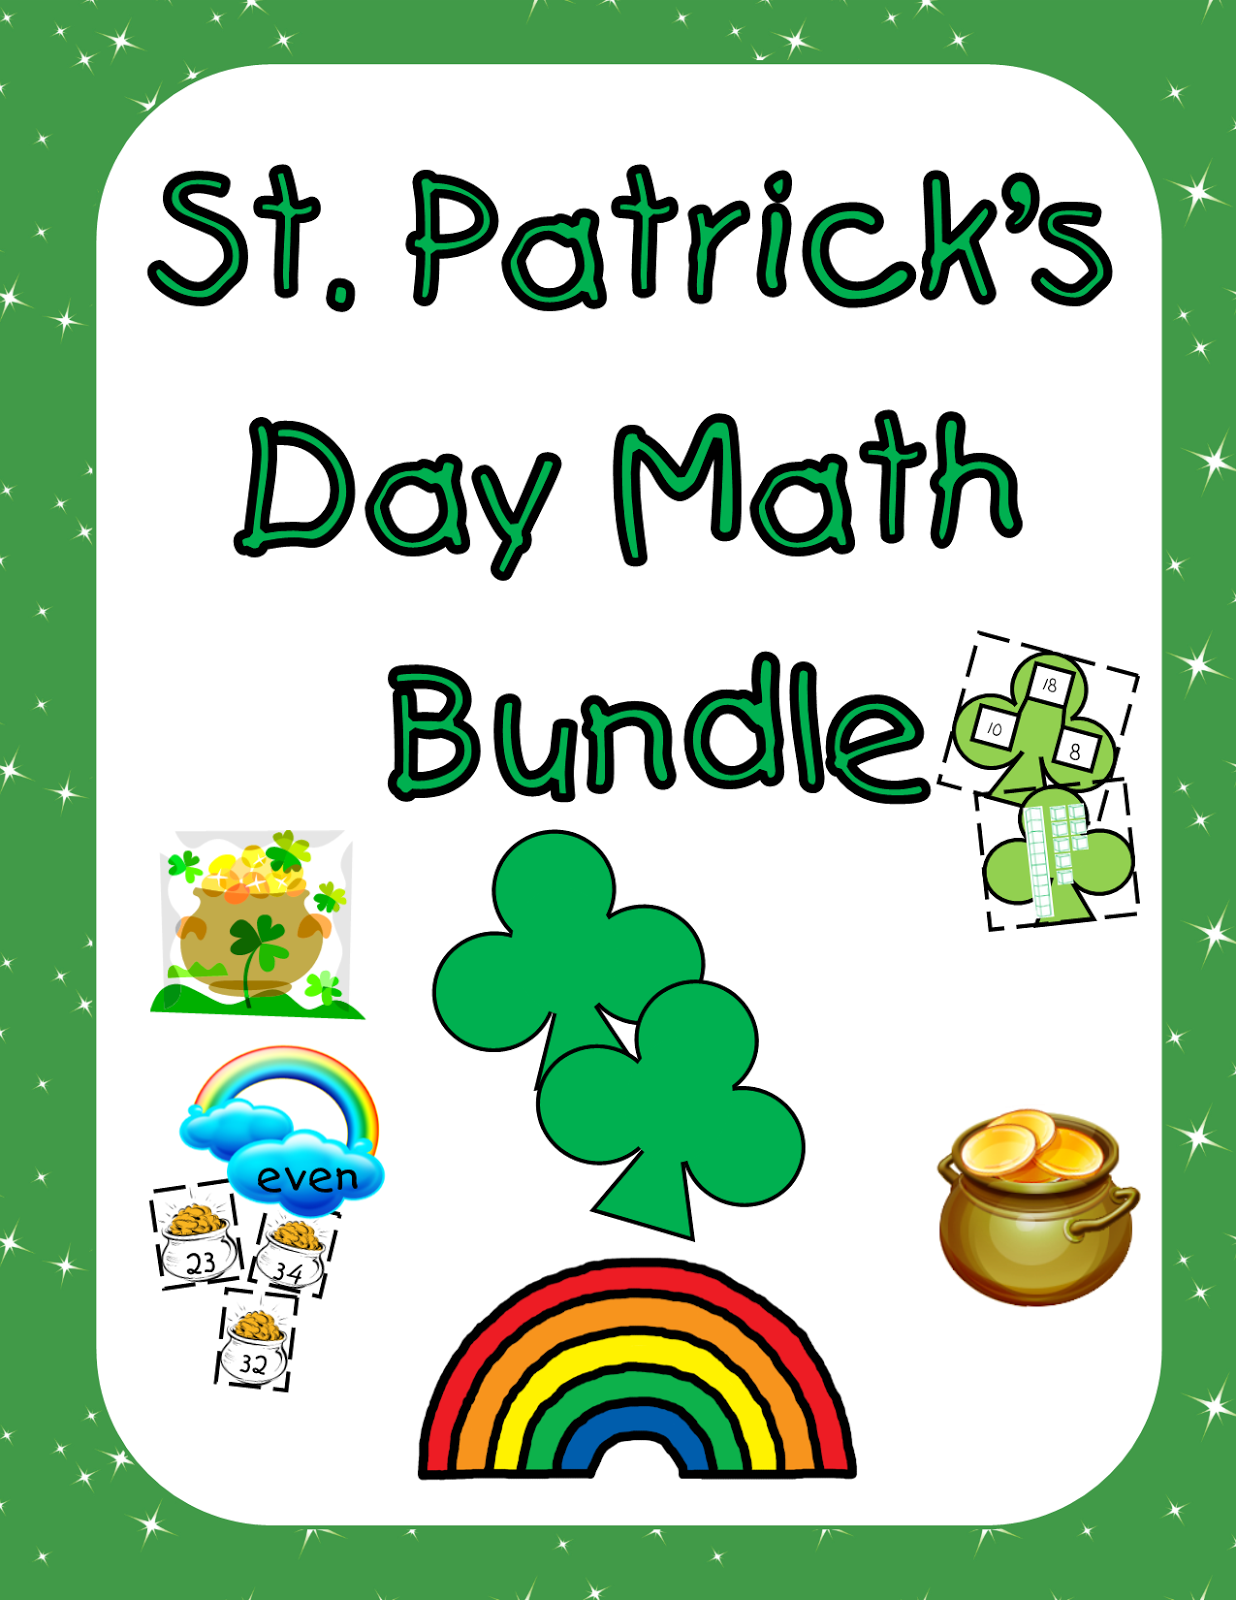 Pride and Primary: St. Patrick's Day Math Bundle